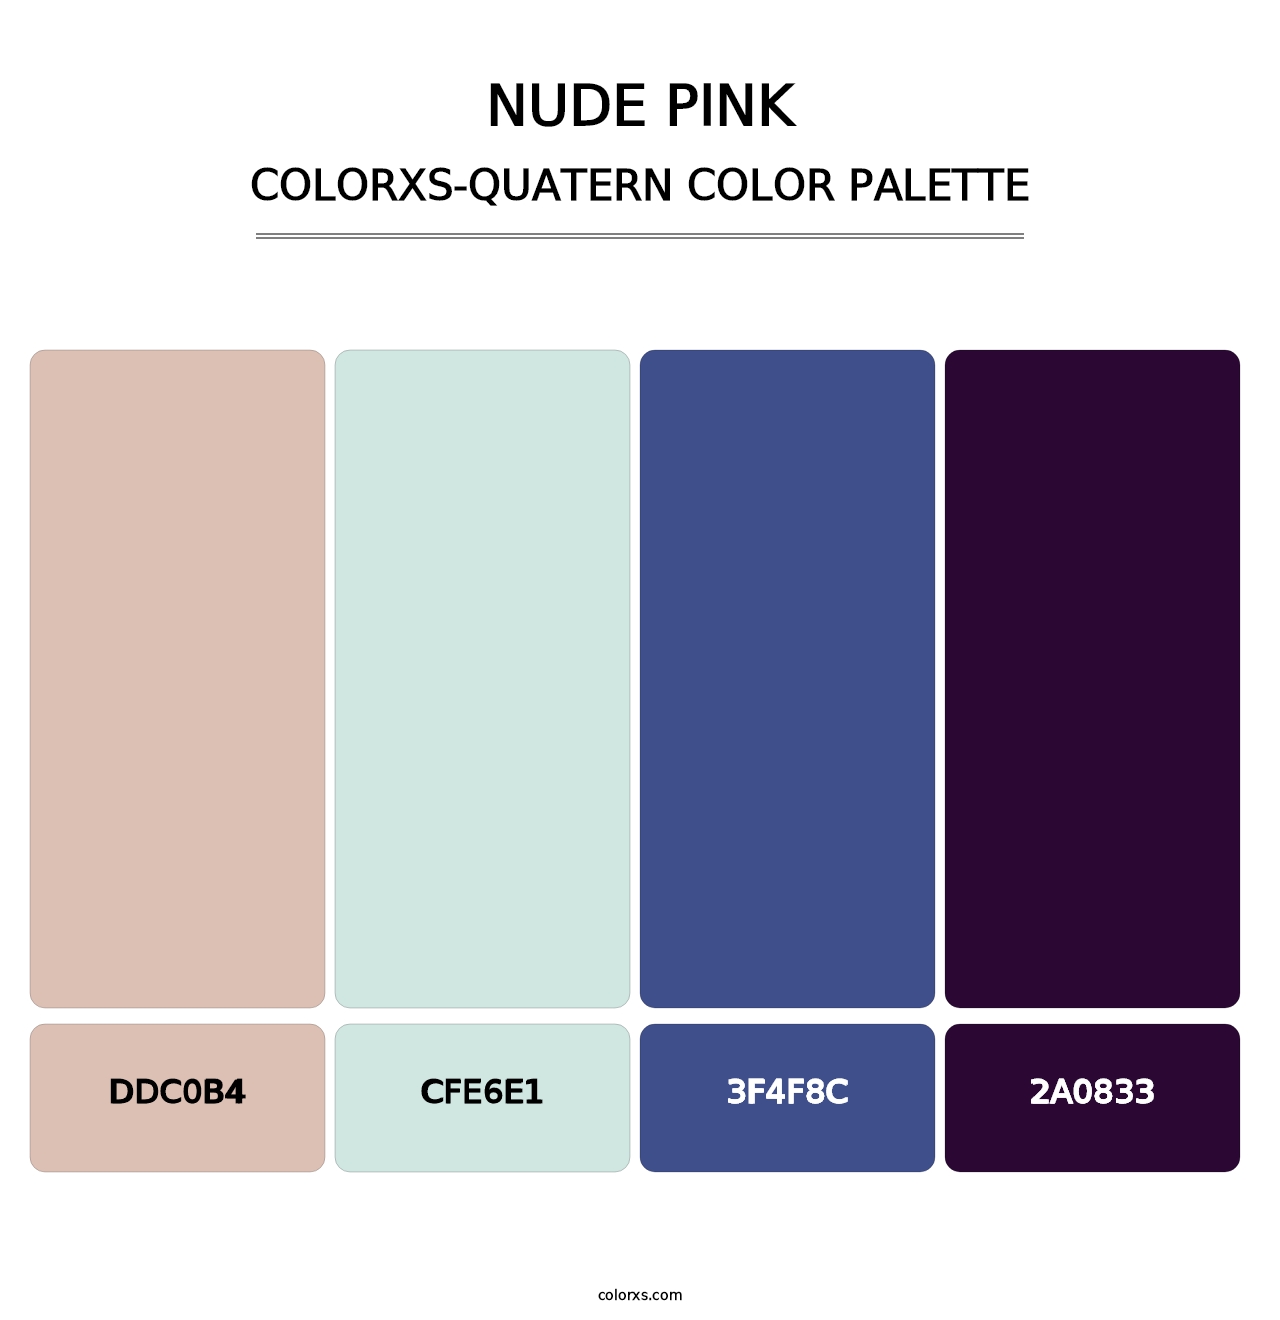 Nude Pink - Colorxs Quatern Palette